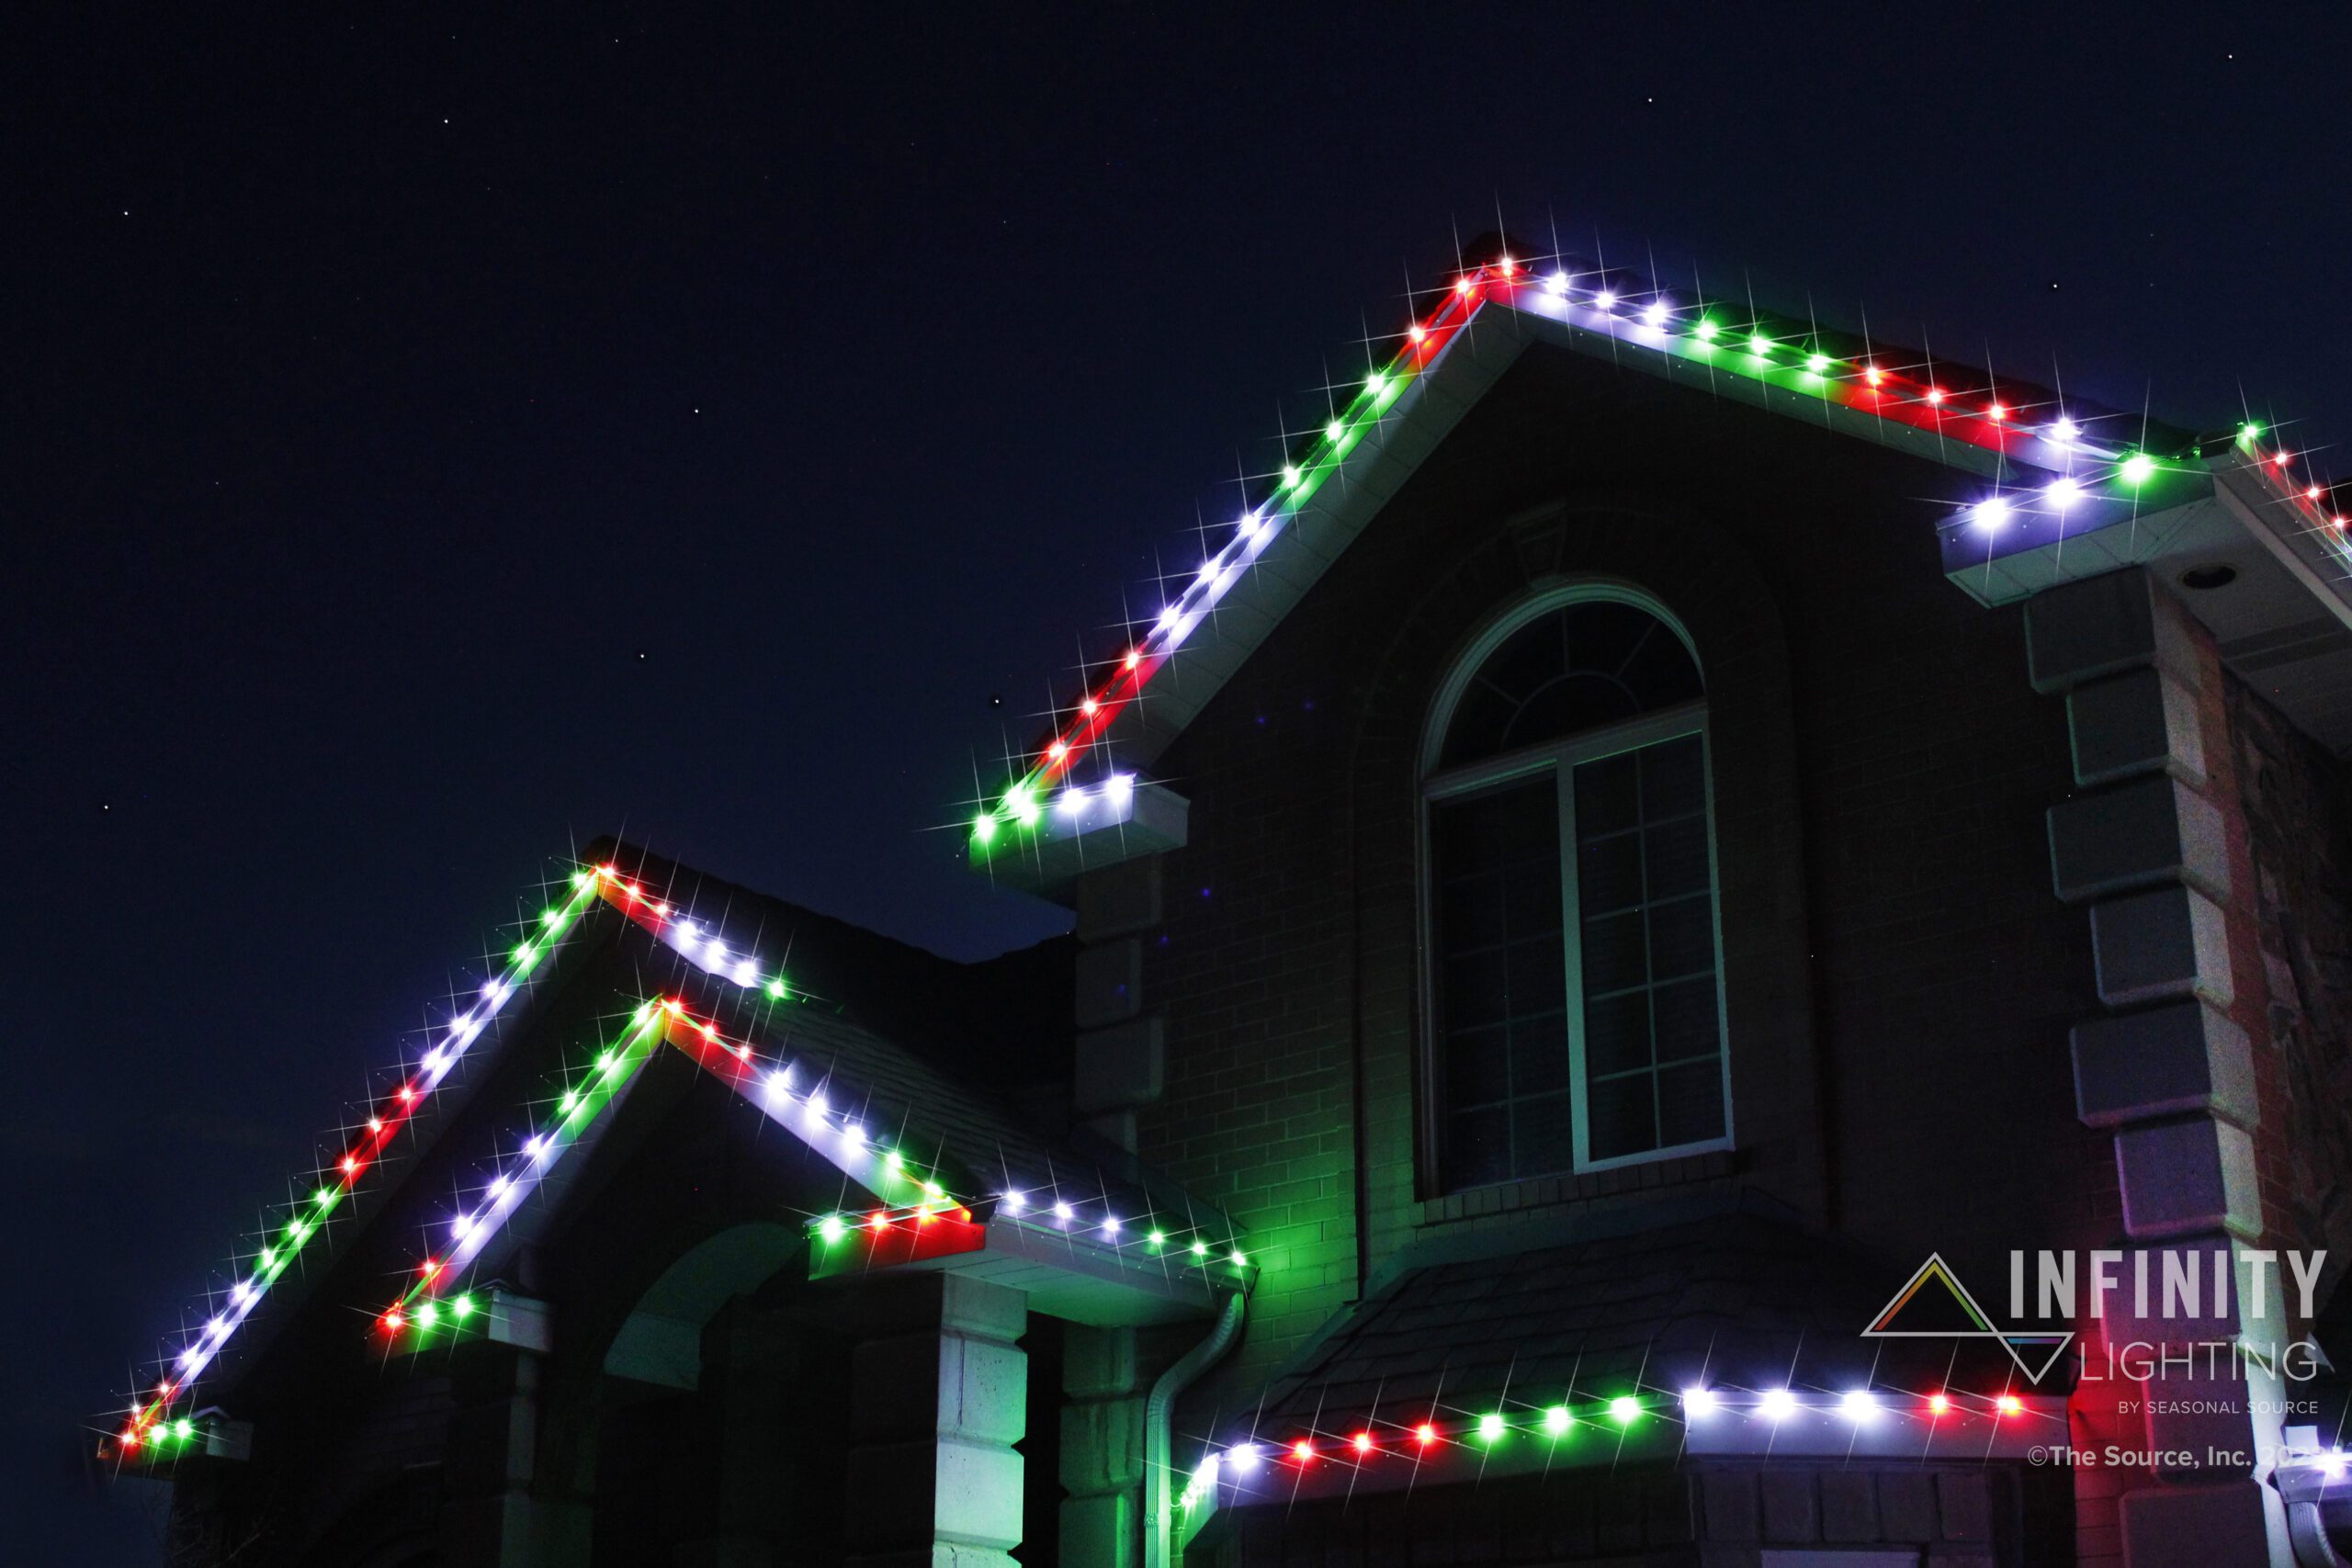 Permanent Christmas lights installed on the roof line of a house.